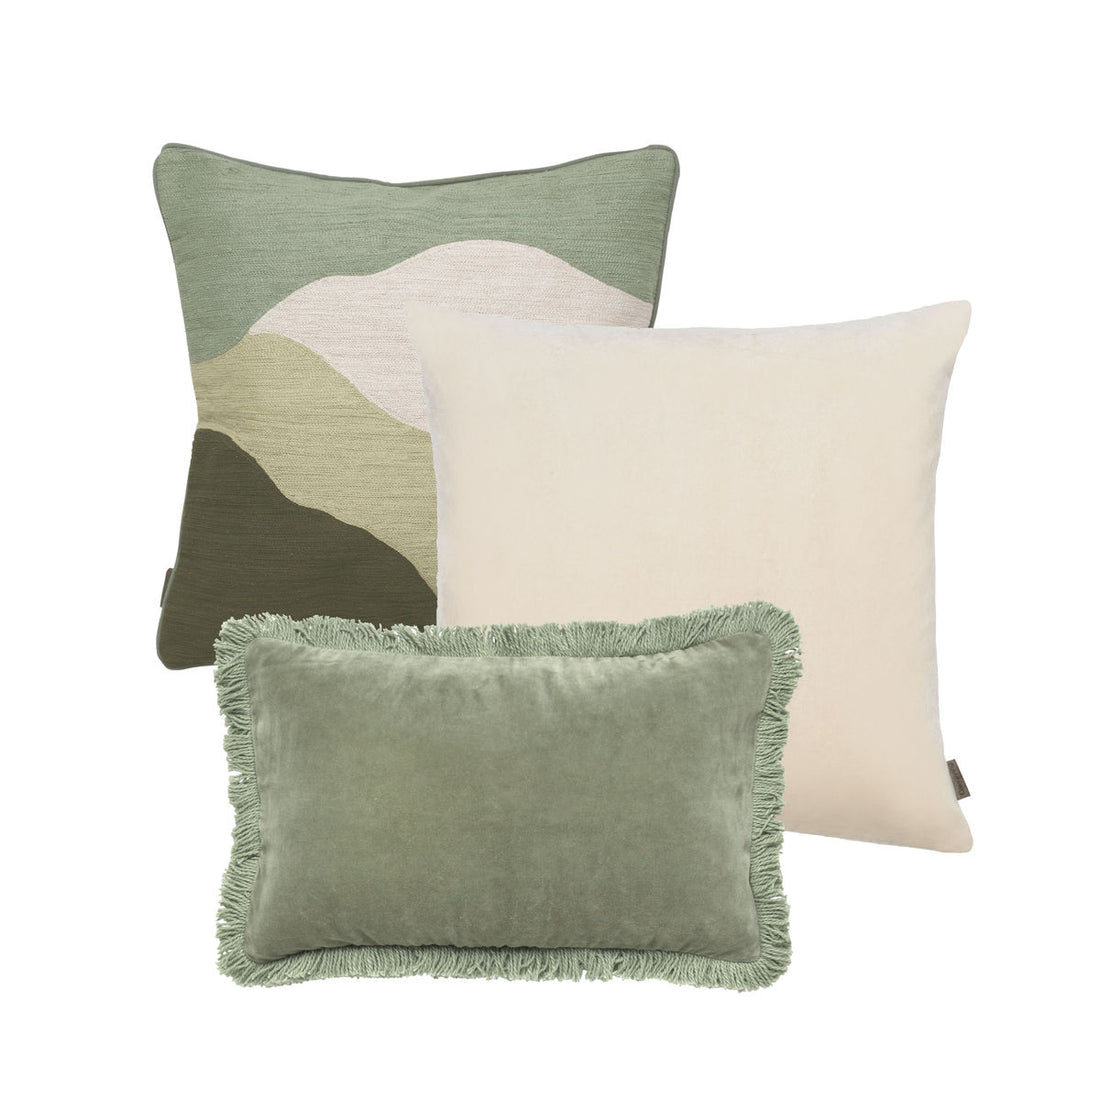 Cozy Living Rosie Patchwork Velvet Cushion - ARMY, SEAGRASS